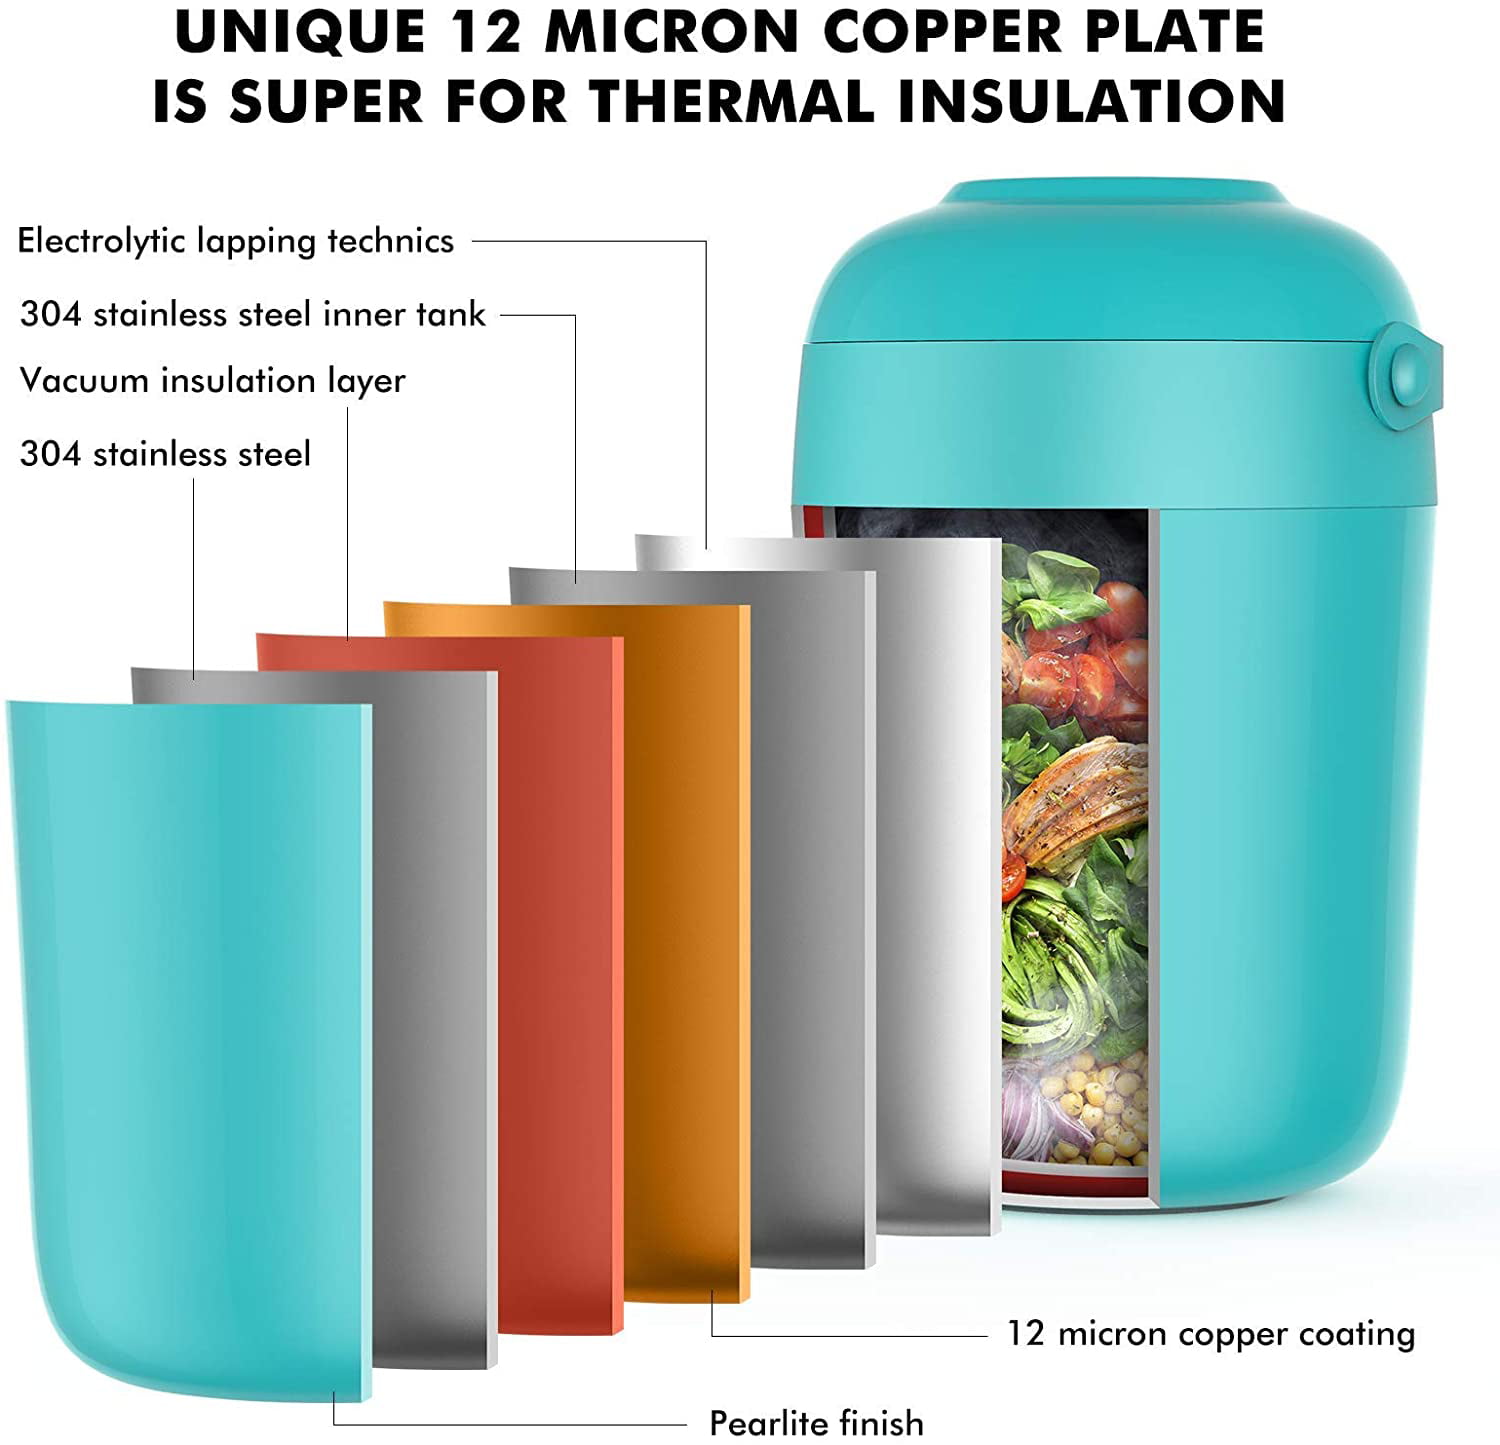 DaCool Thermos for Hot Food Insulated Food Jar 16 Ounce Vacuum Stainless  Lunch Container Bento for Kids Adult with Spoon Leakproof for School Office